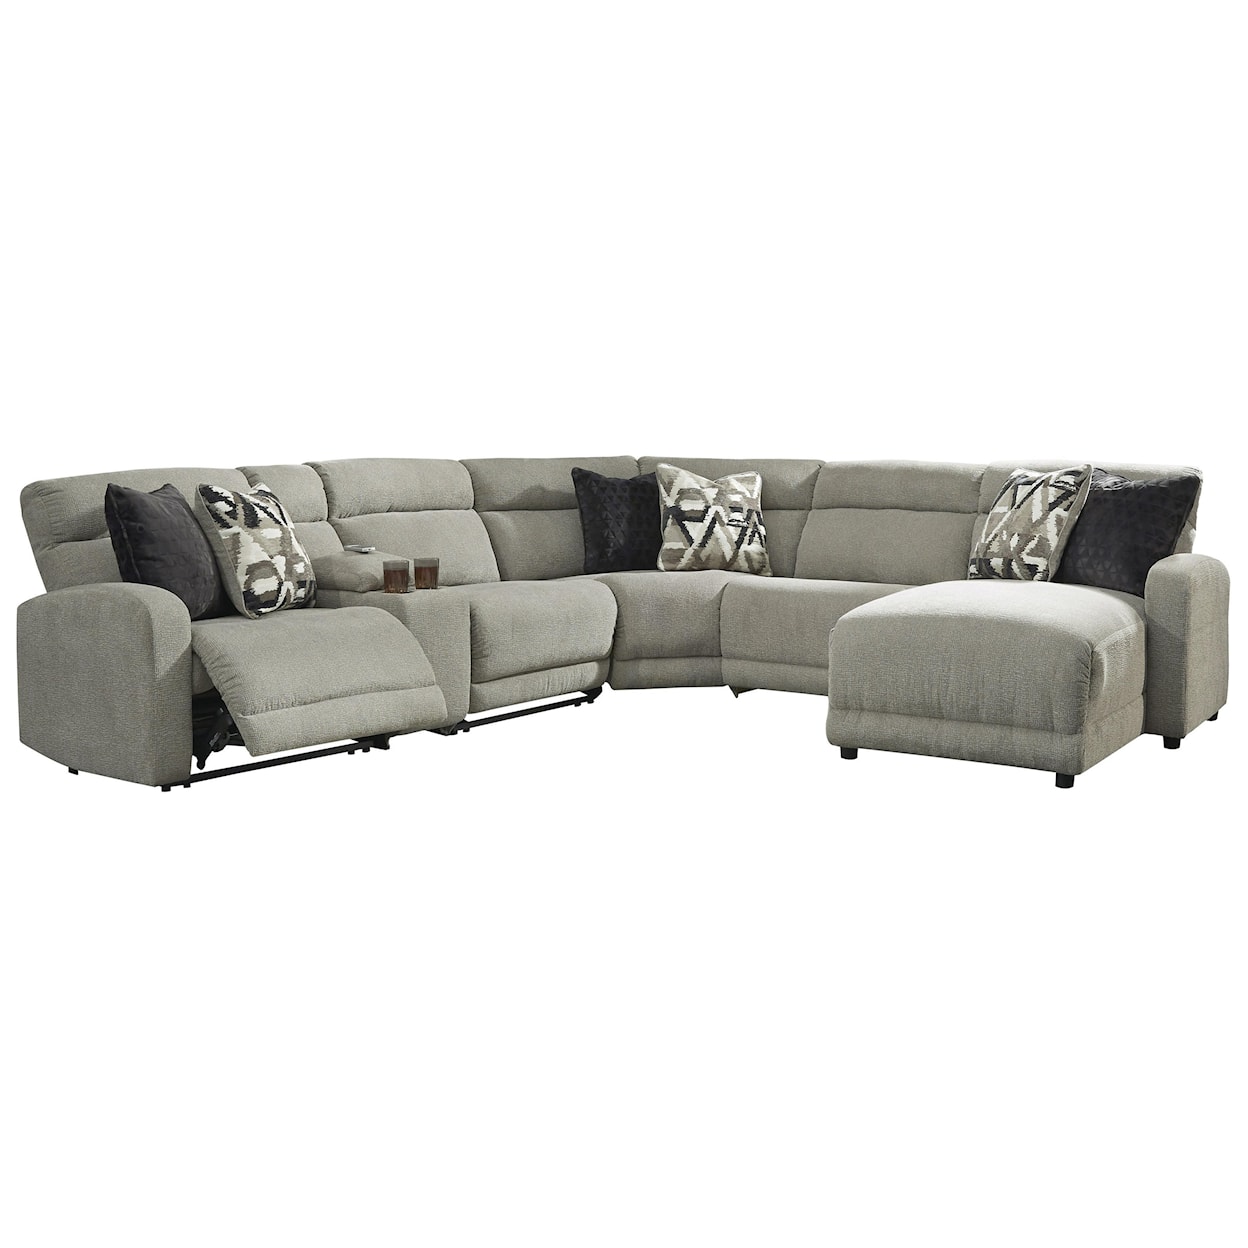 Signature Design by Ashley Colleyville 6 Piece Power Reclining Sectional Sofa